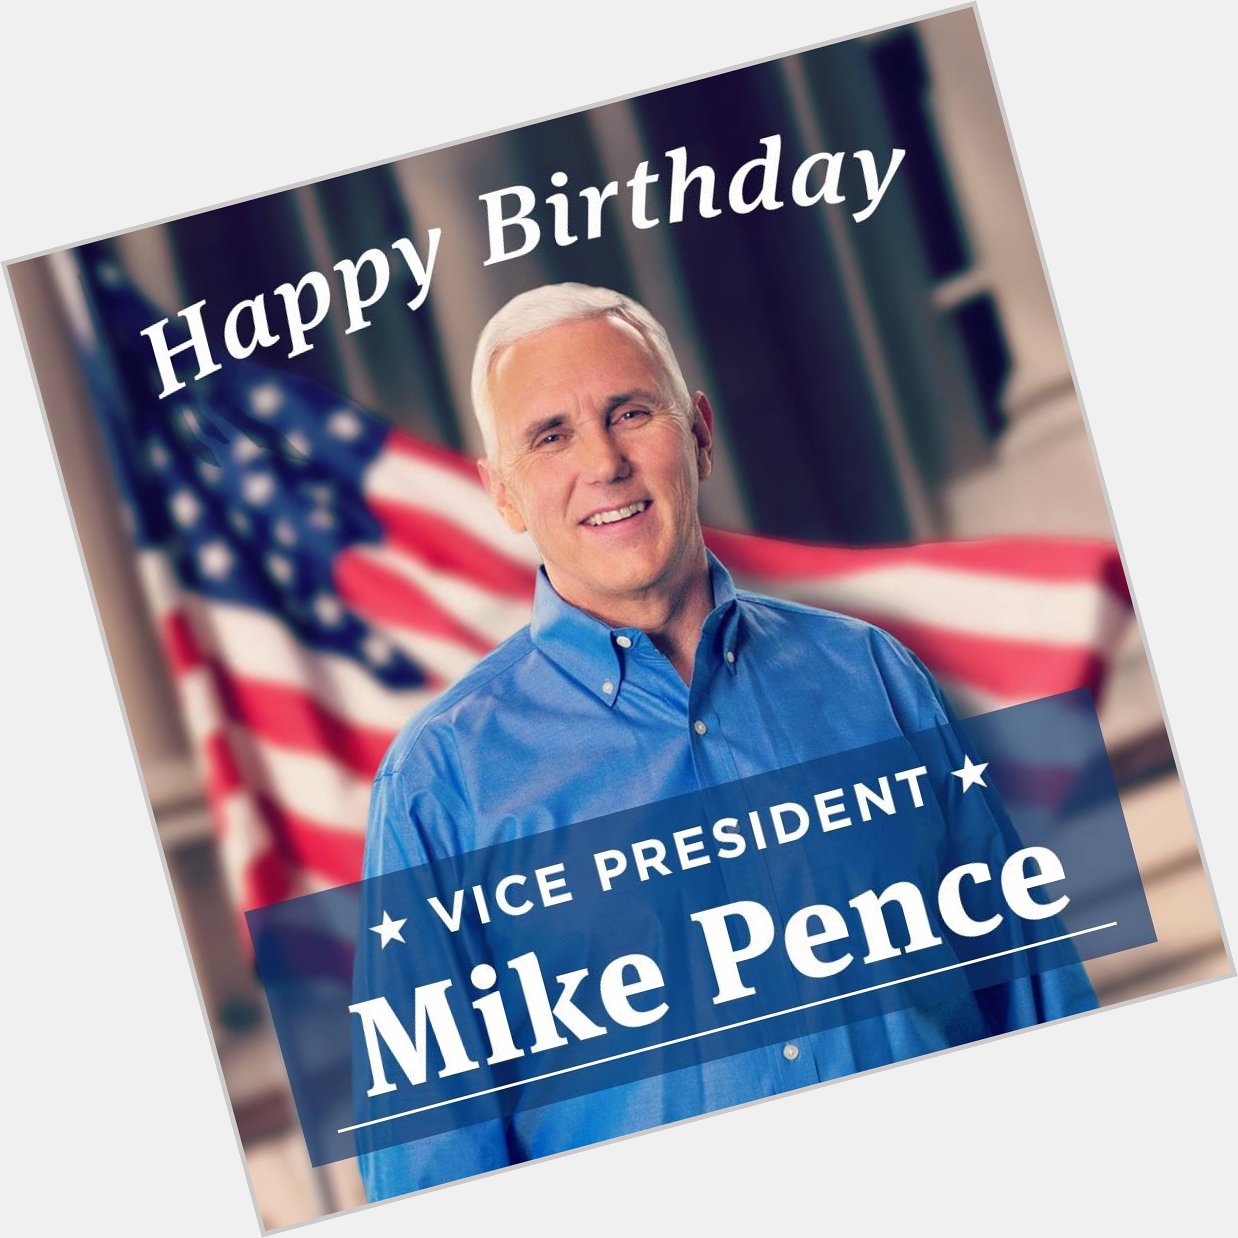 Wishing a Happy Birthday to one of the best- Mike Pence! 